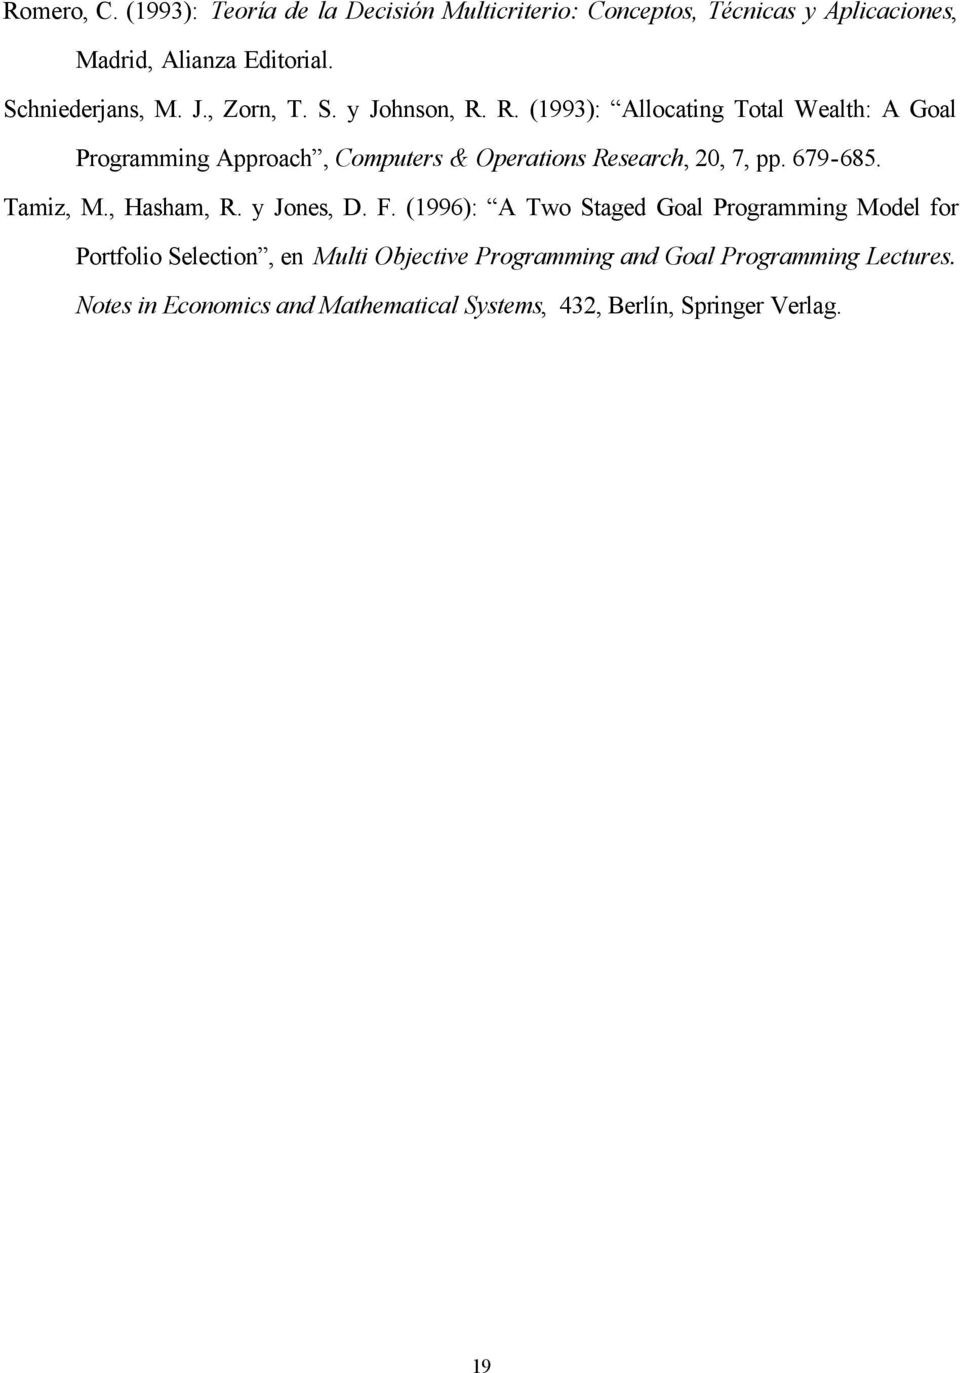 R. (993): Allocatg Total Wealth: A Goal Programmg Approach, Computers & Operatos Research, 20, 7, pp. 679-685.